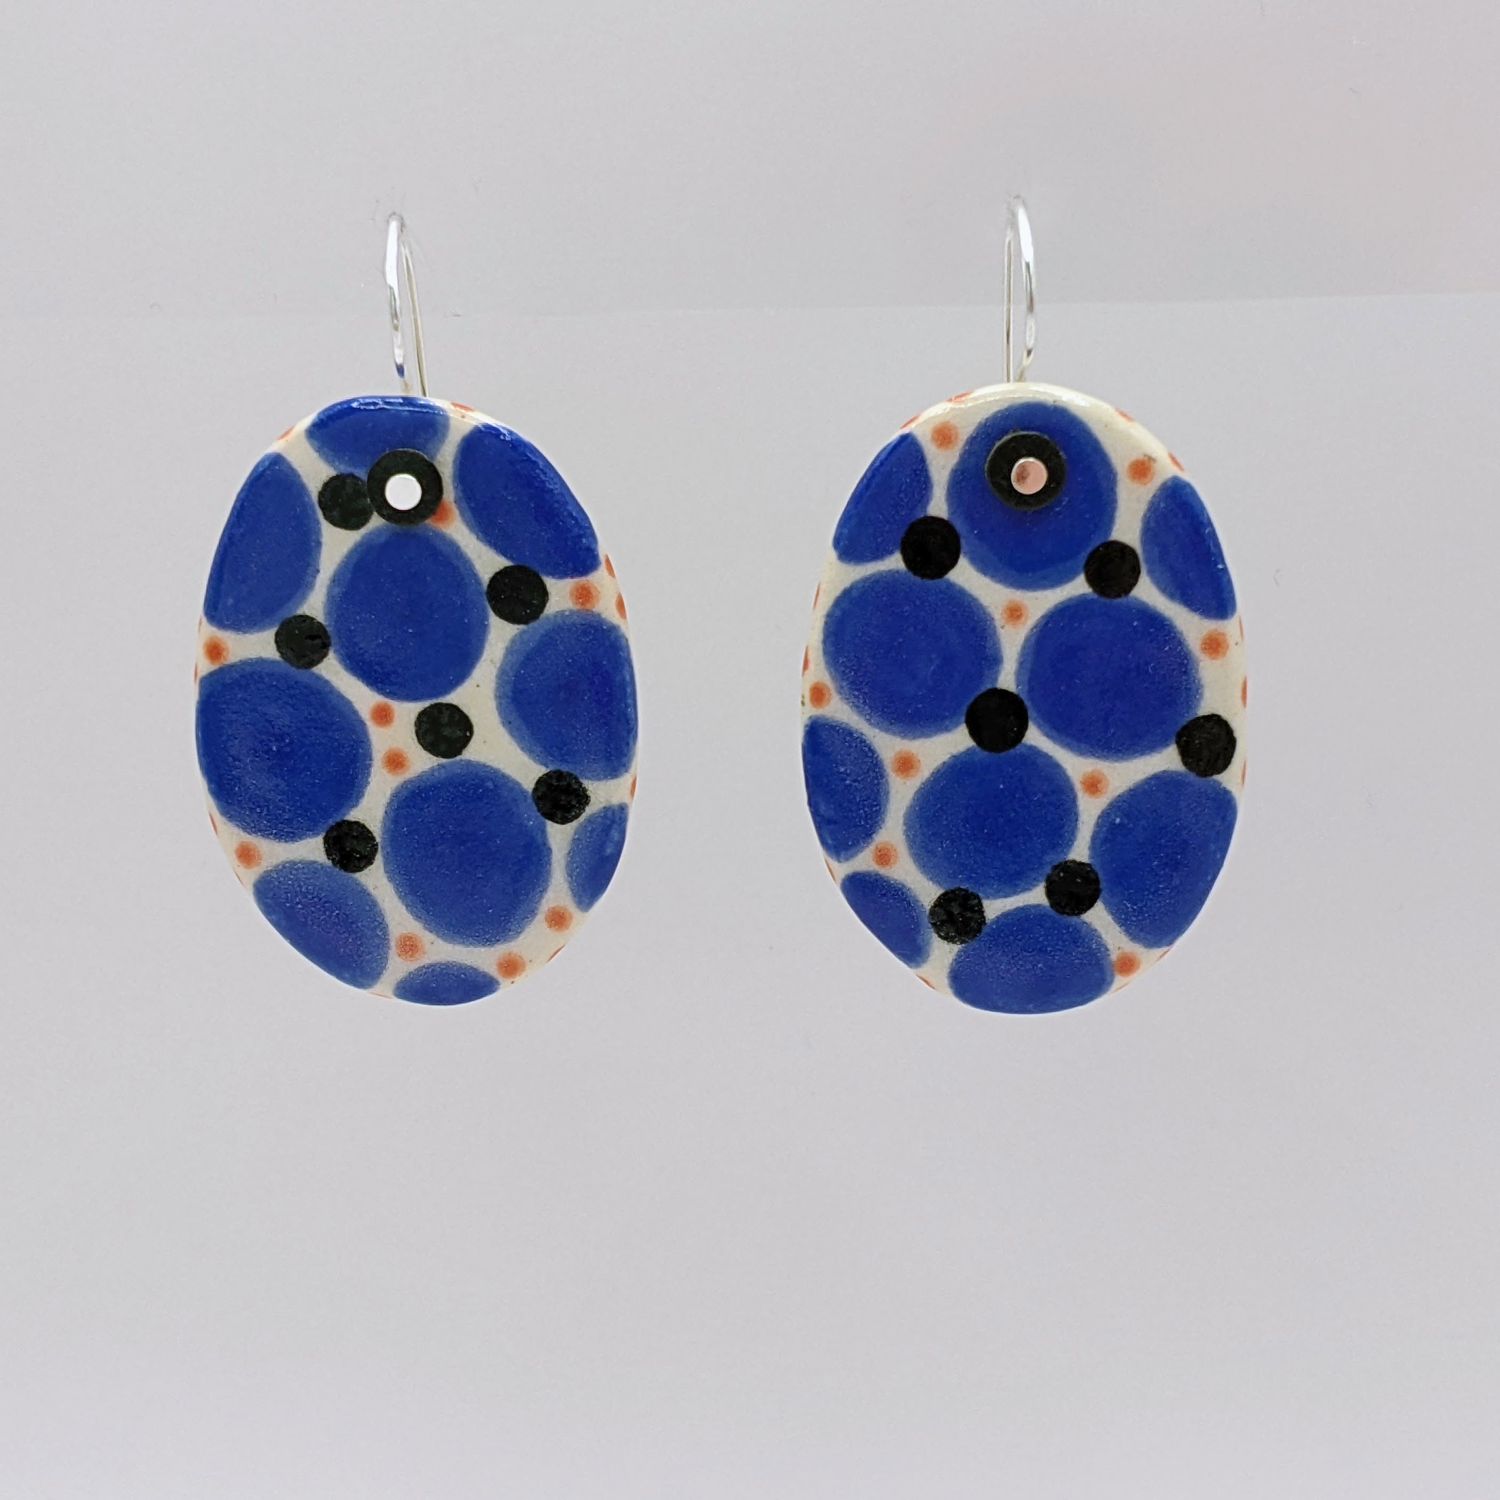 Here and Here: Blue Dotted Ceramic Disc Earrings Product Image 1 of 3